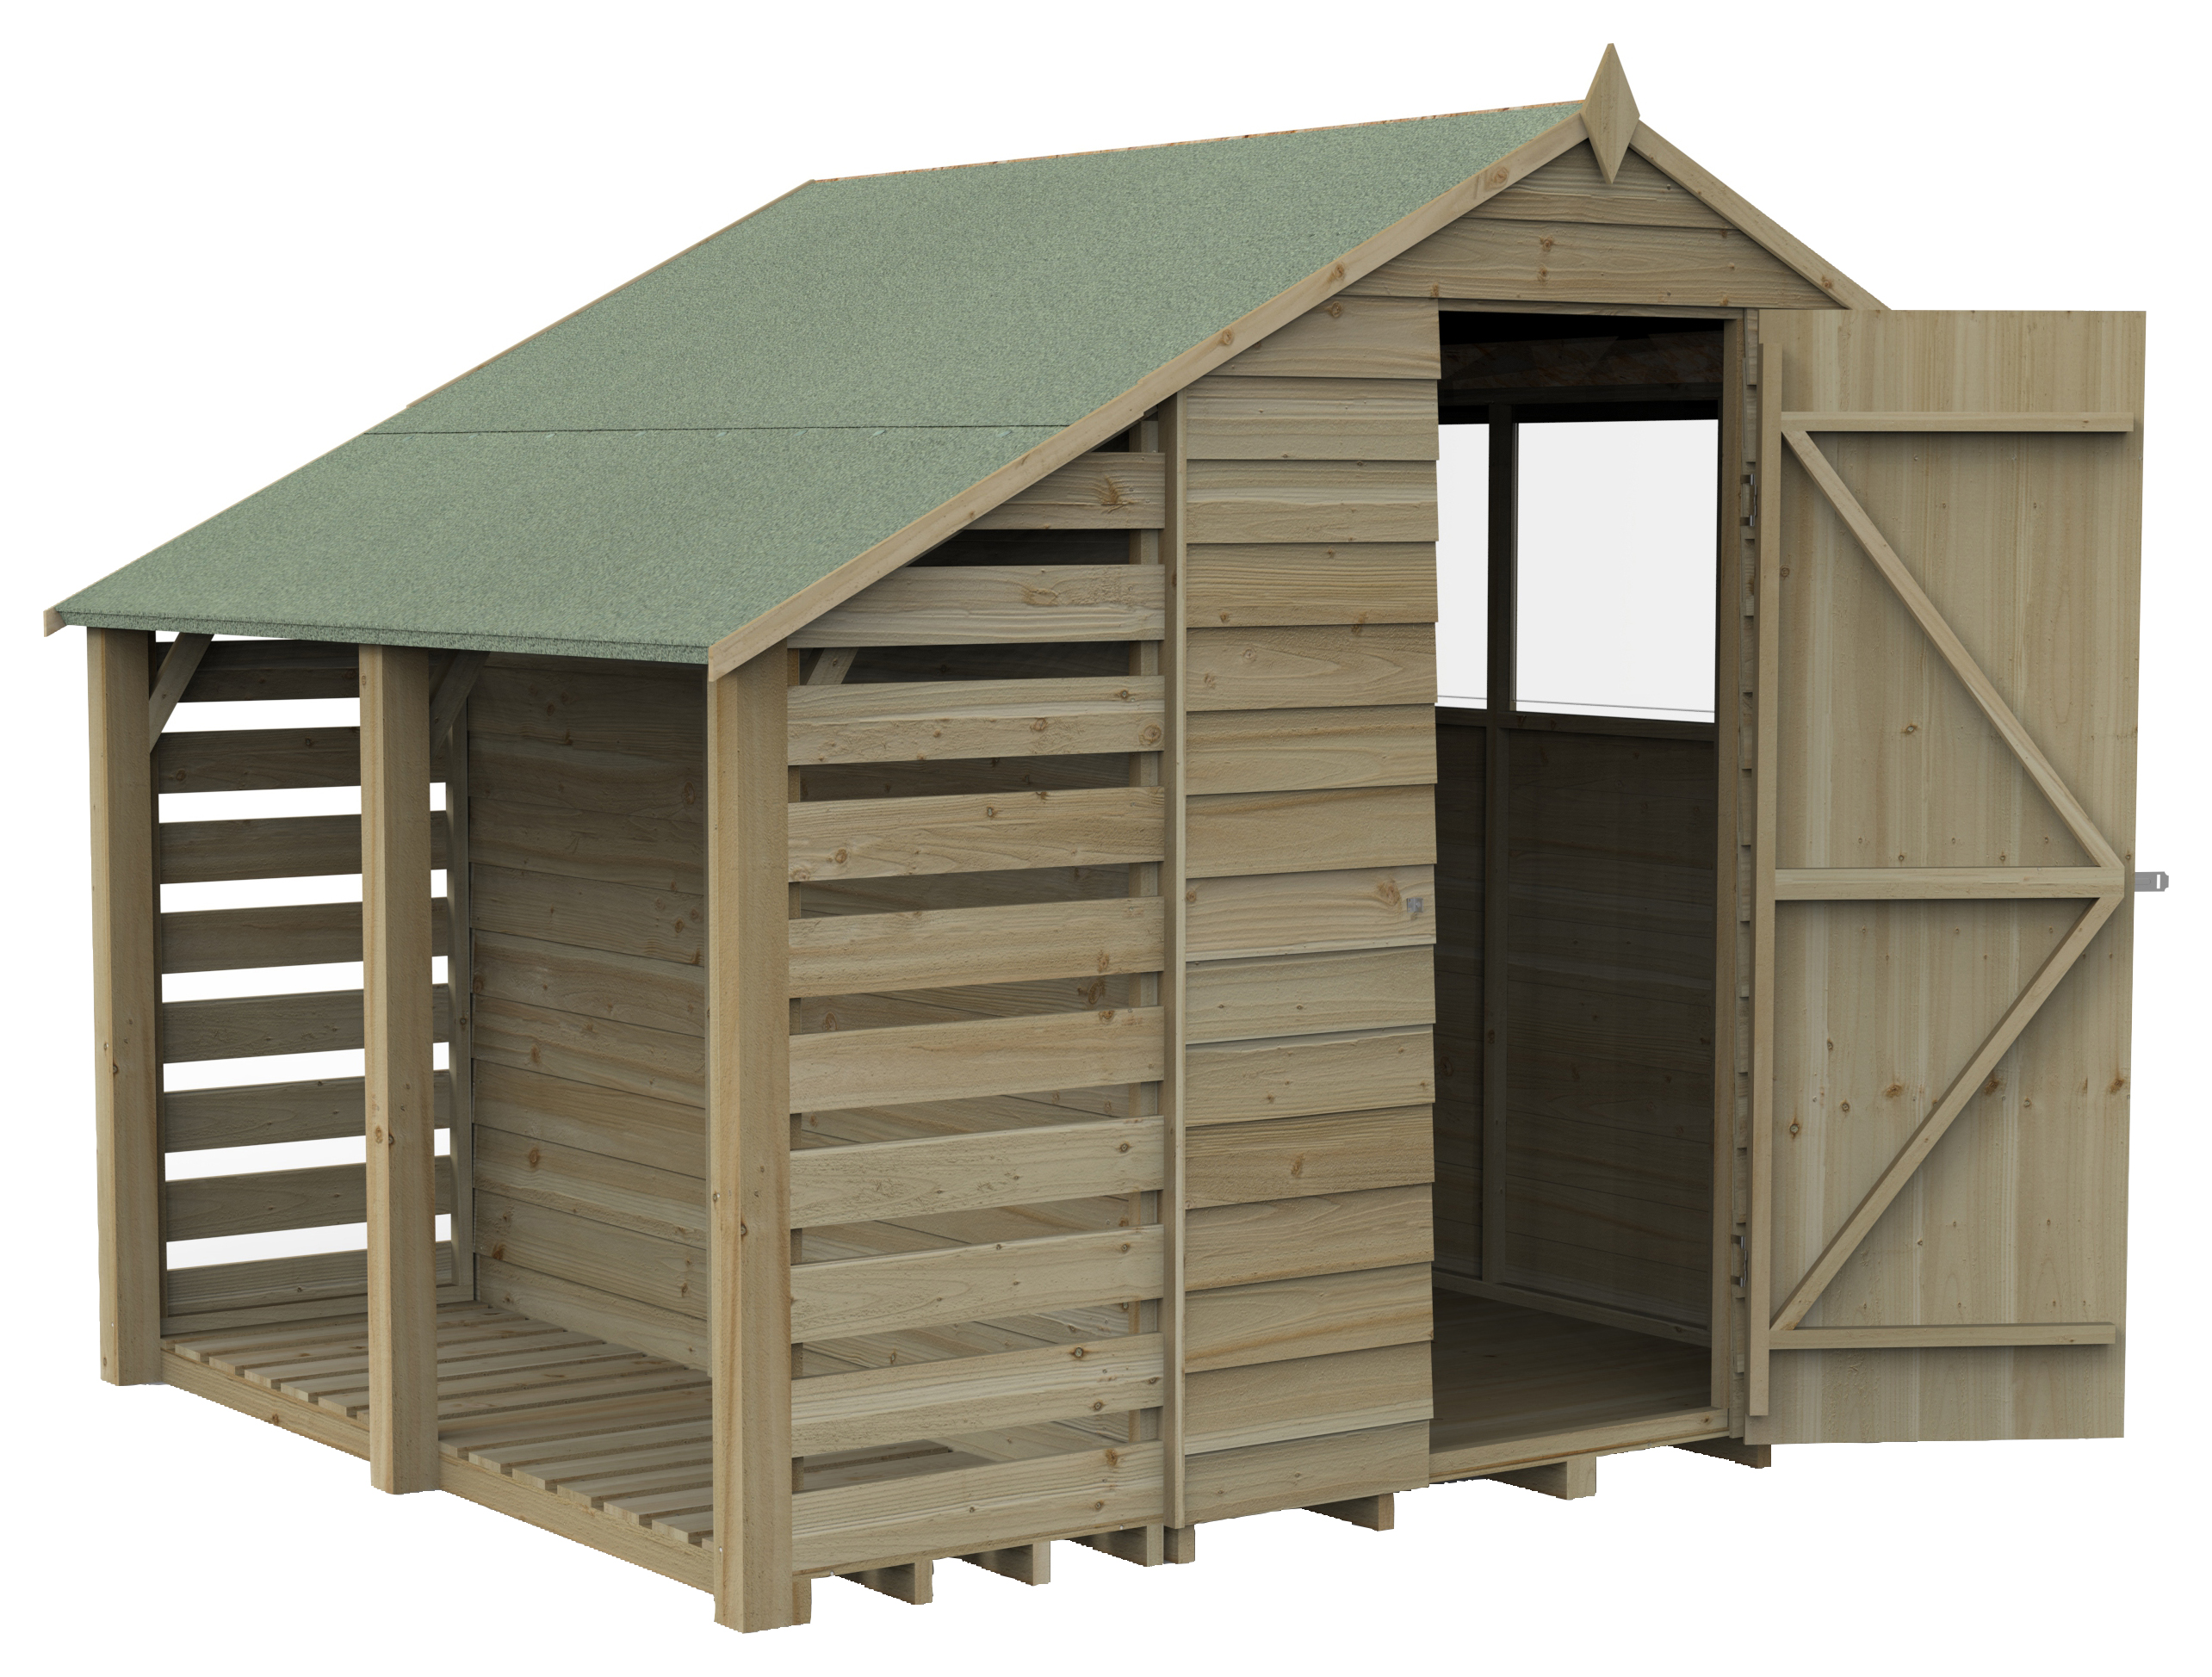 Forest Garden 7 x 5ft 4Life Apex Overlap Pressure Treated Shed with Lean-To